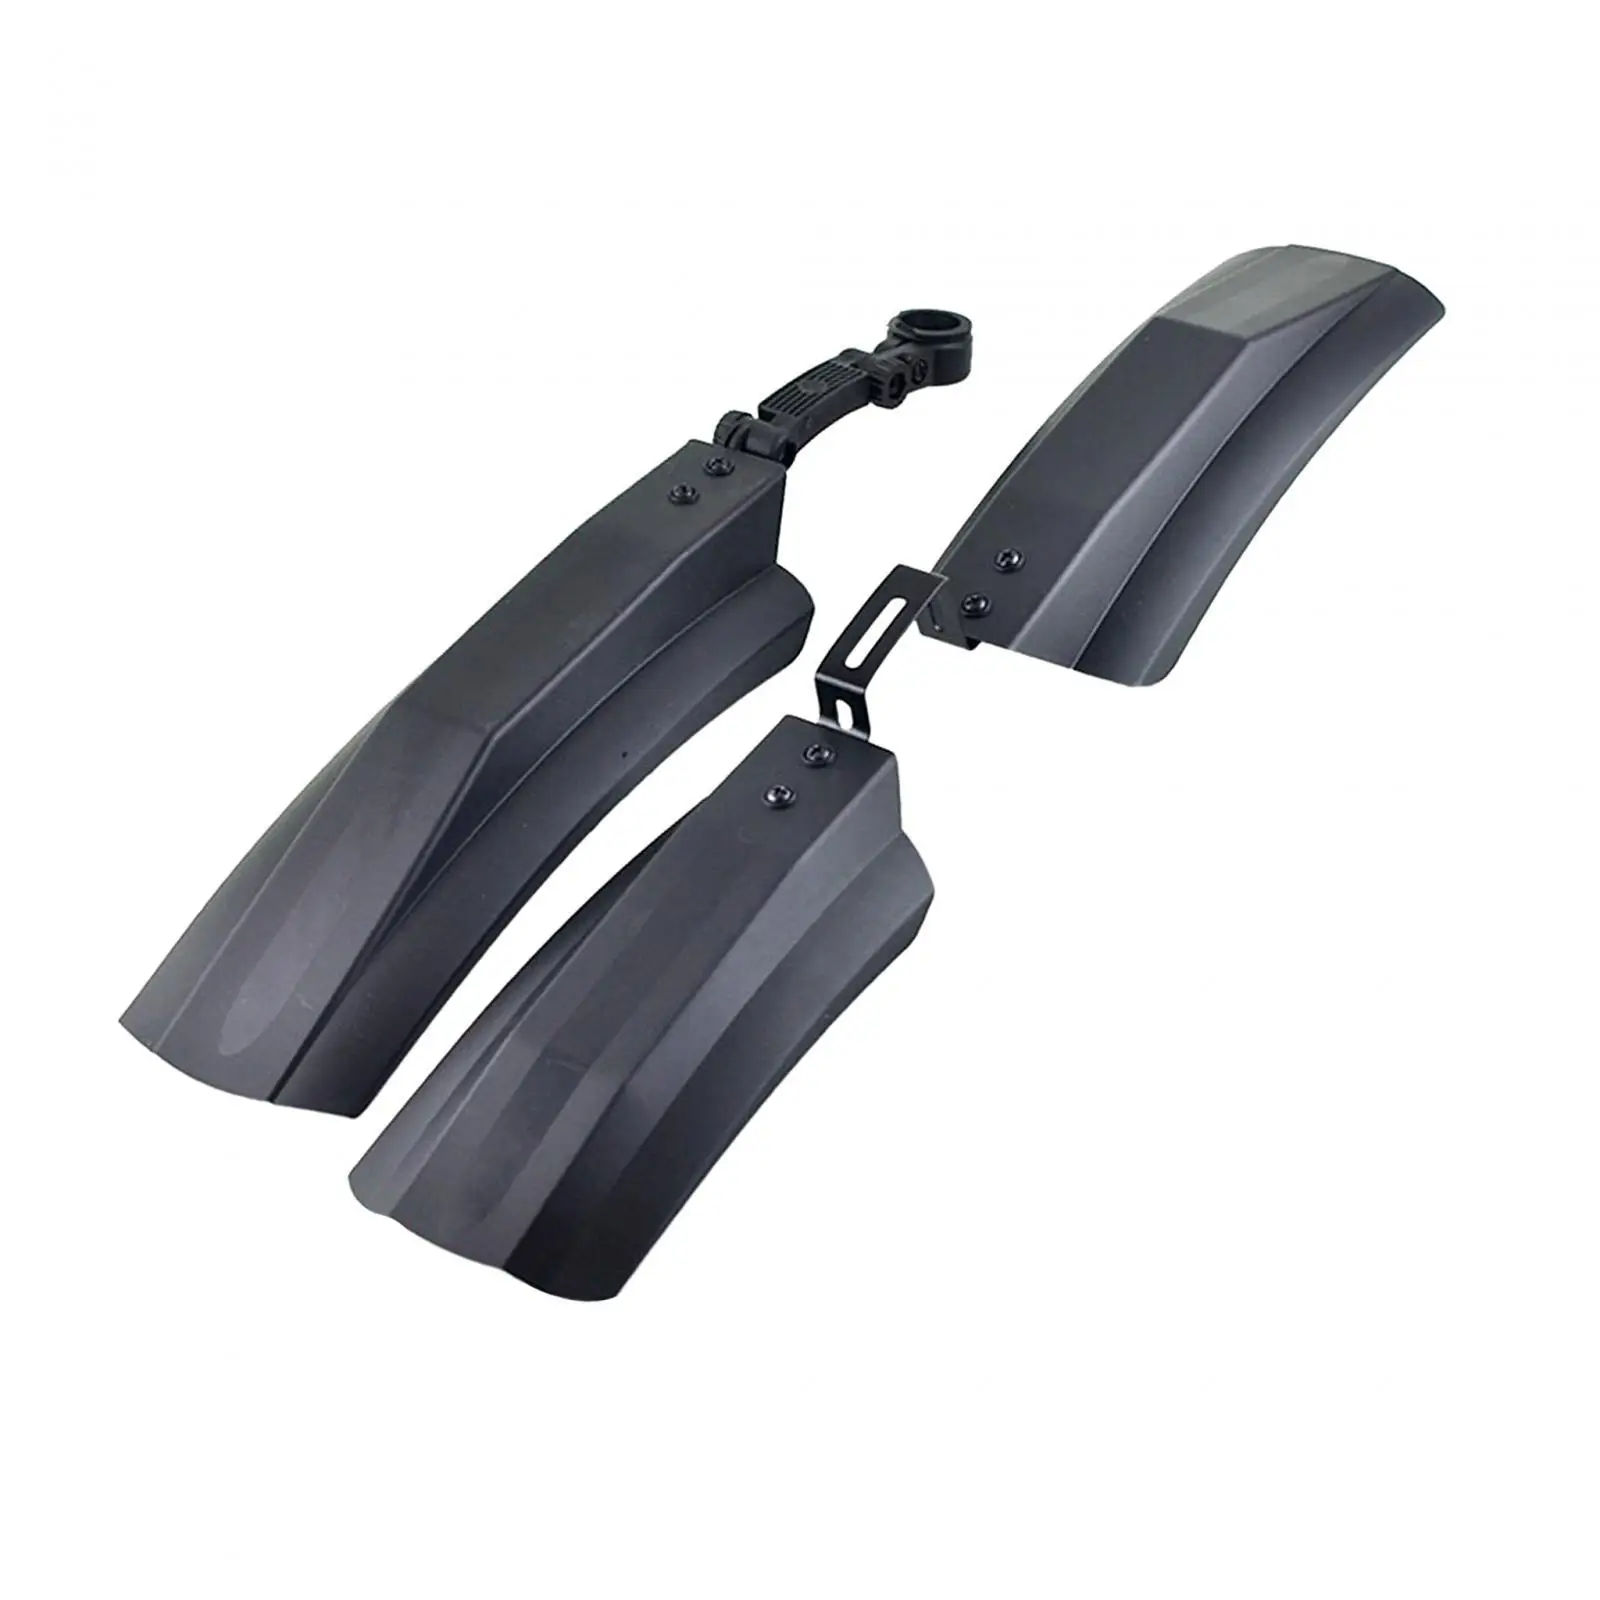 Mountain Bike Fenders, Bicycle Tire Mudguard, Front Rear for 20